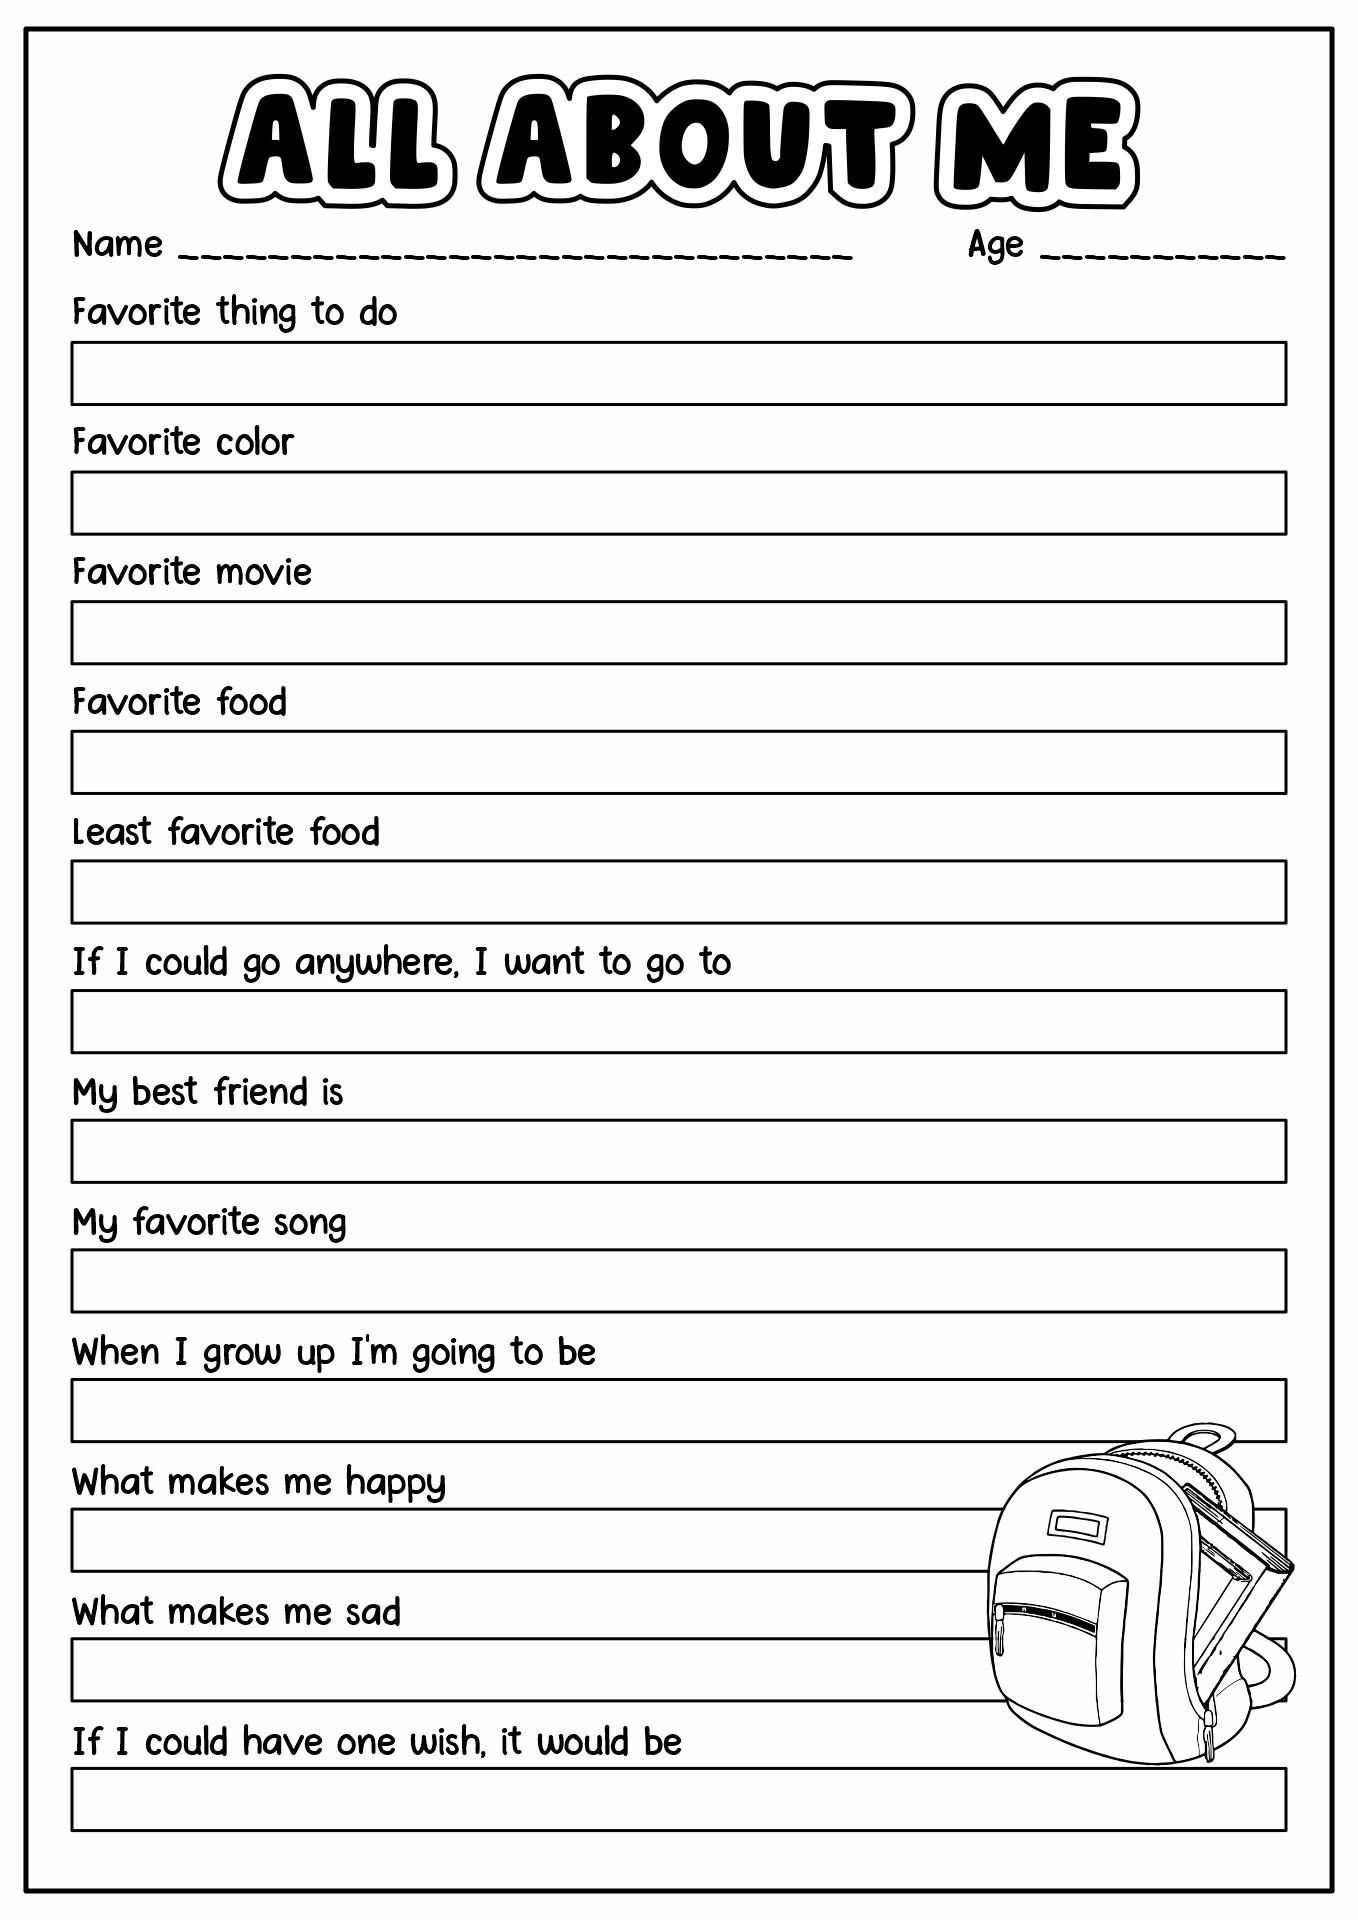 All About Me Questions Worksheet Image